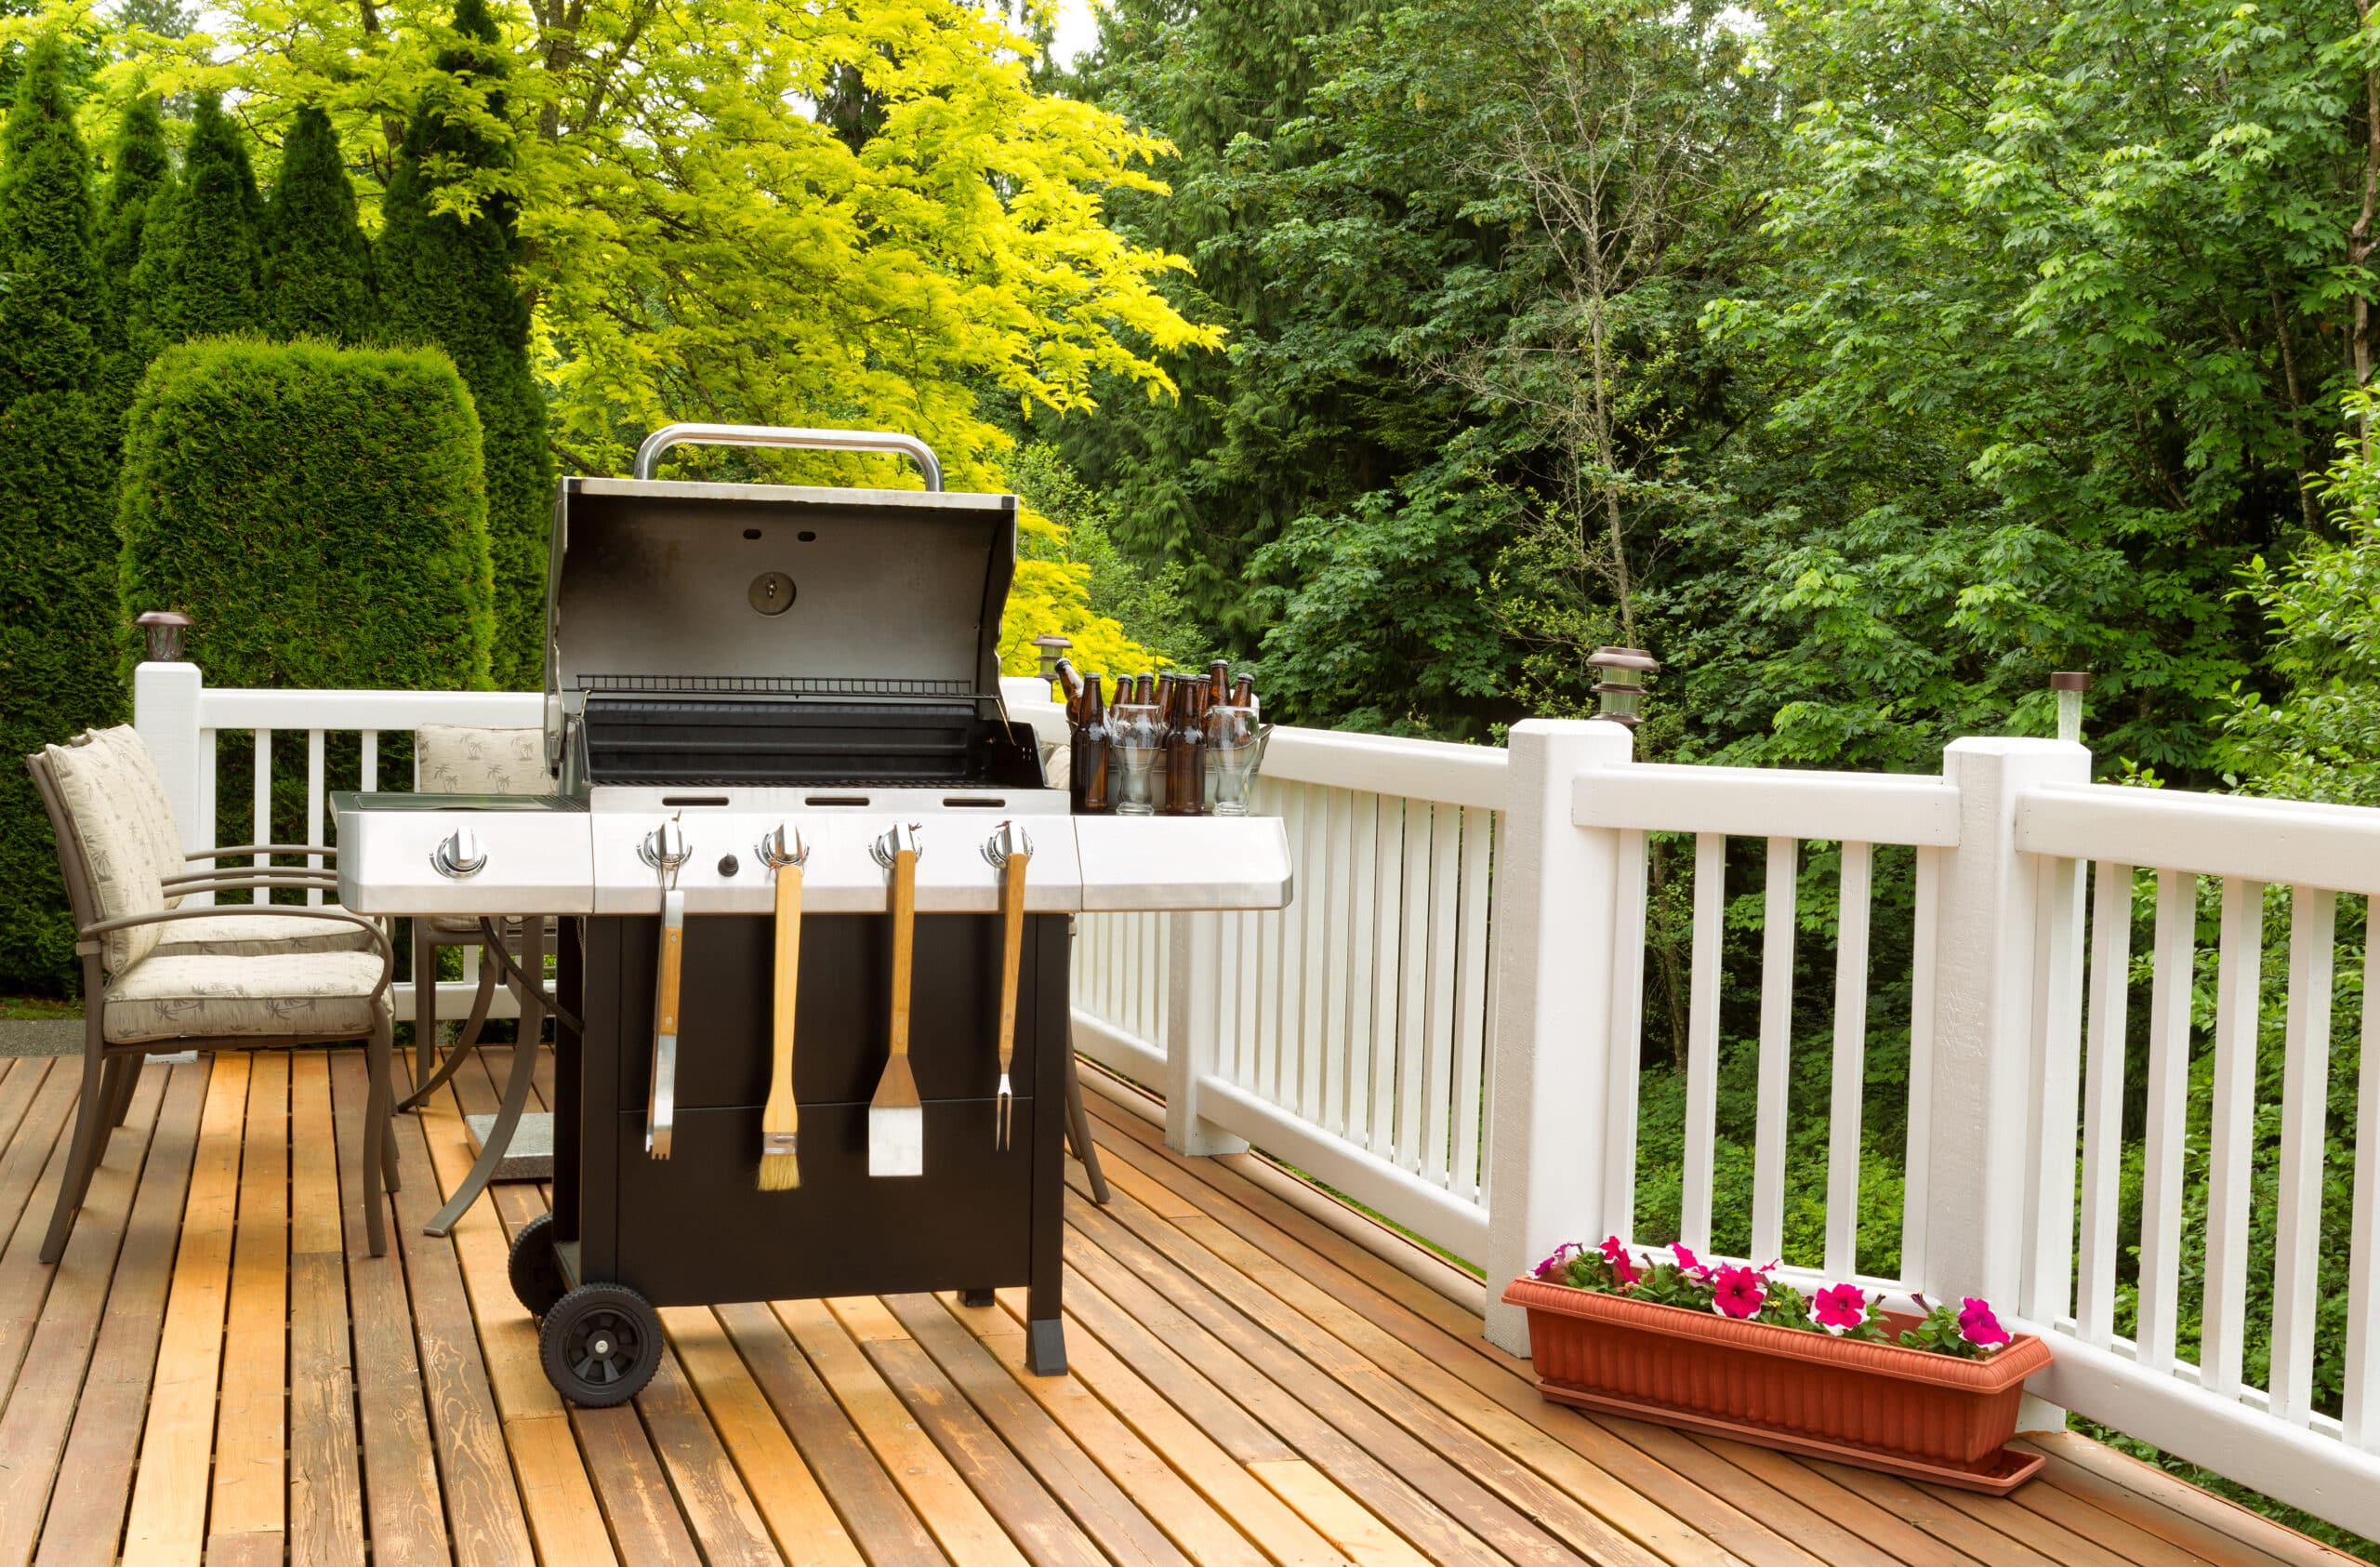 Is It Safe to Grill on a Wooden Deck?